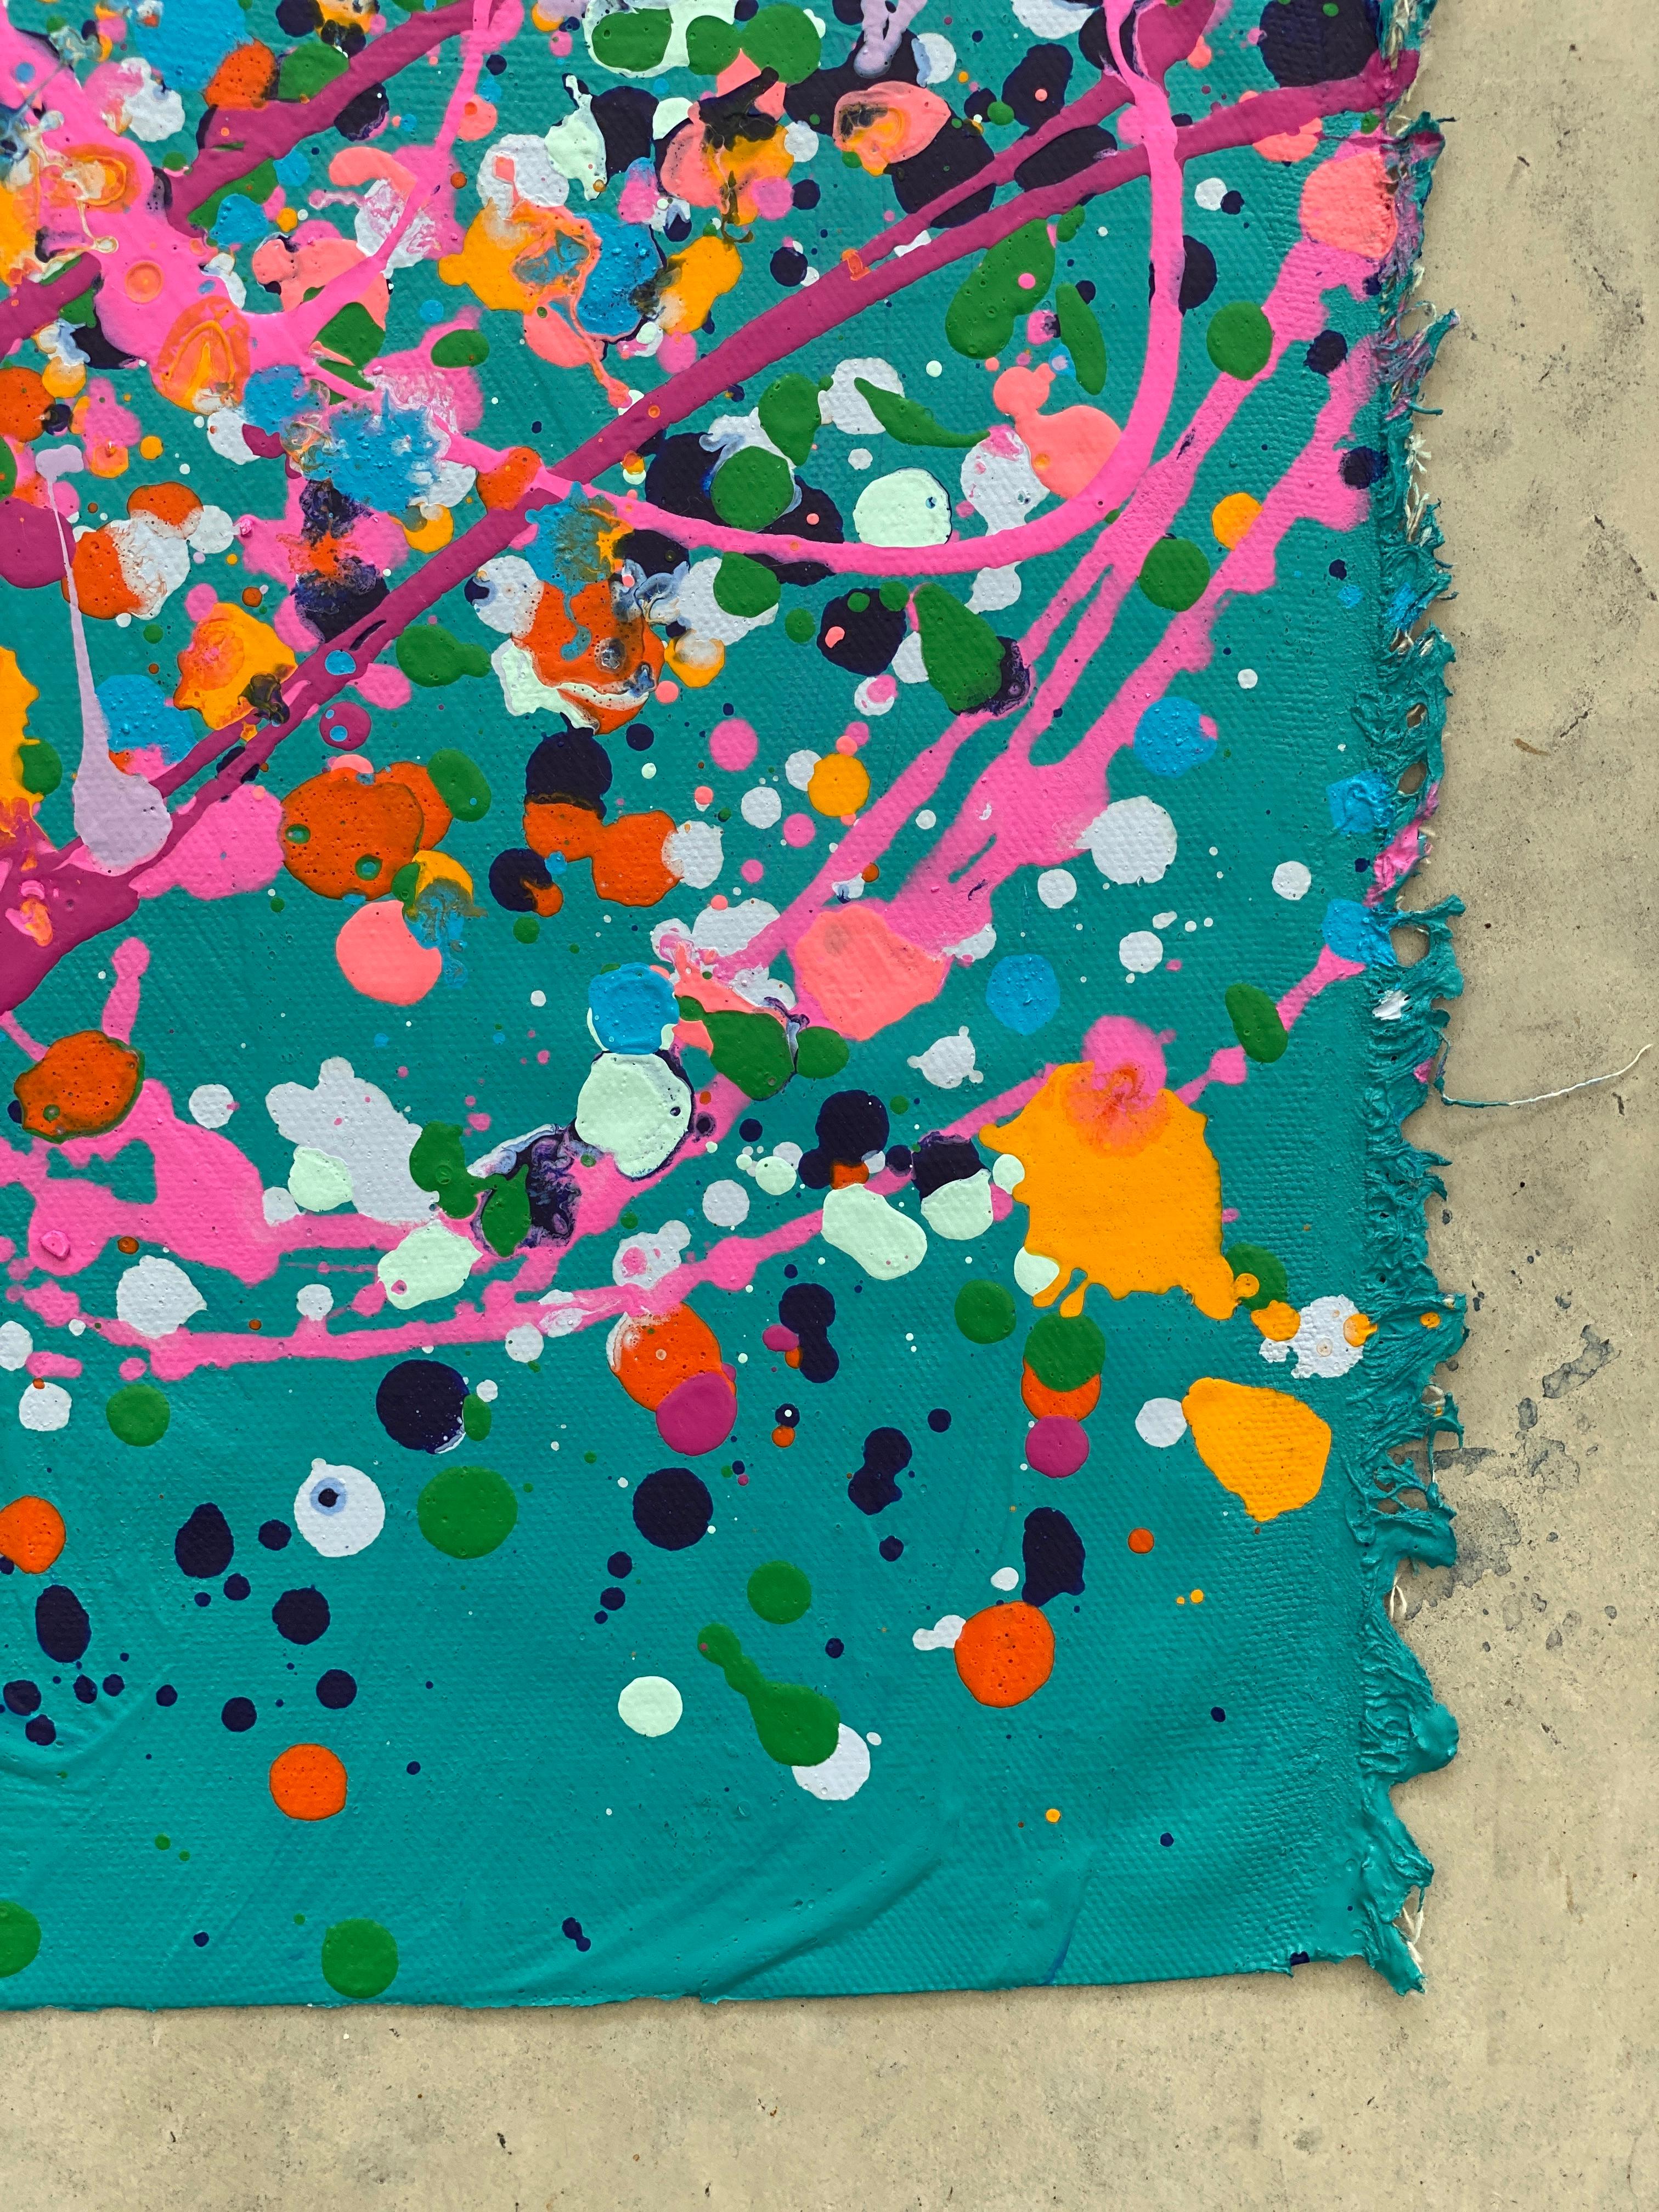 Colorful spatter no9 drip abstract expressionist Jackson Pollock red pink green - Abstract Painting by Kathleen Rhee